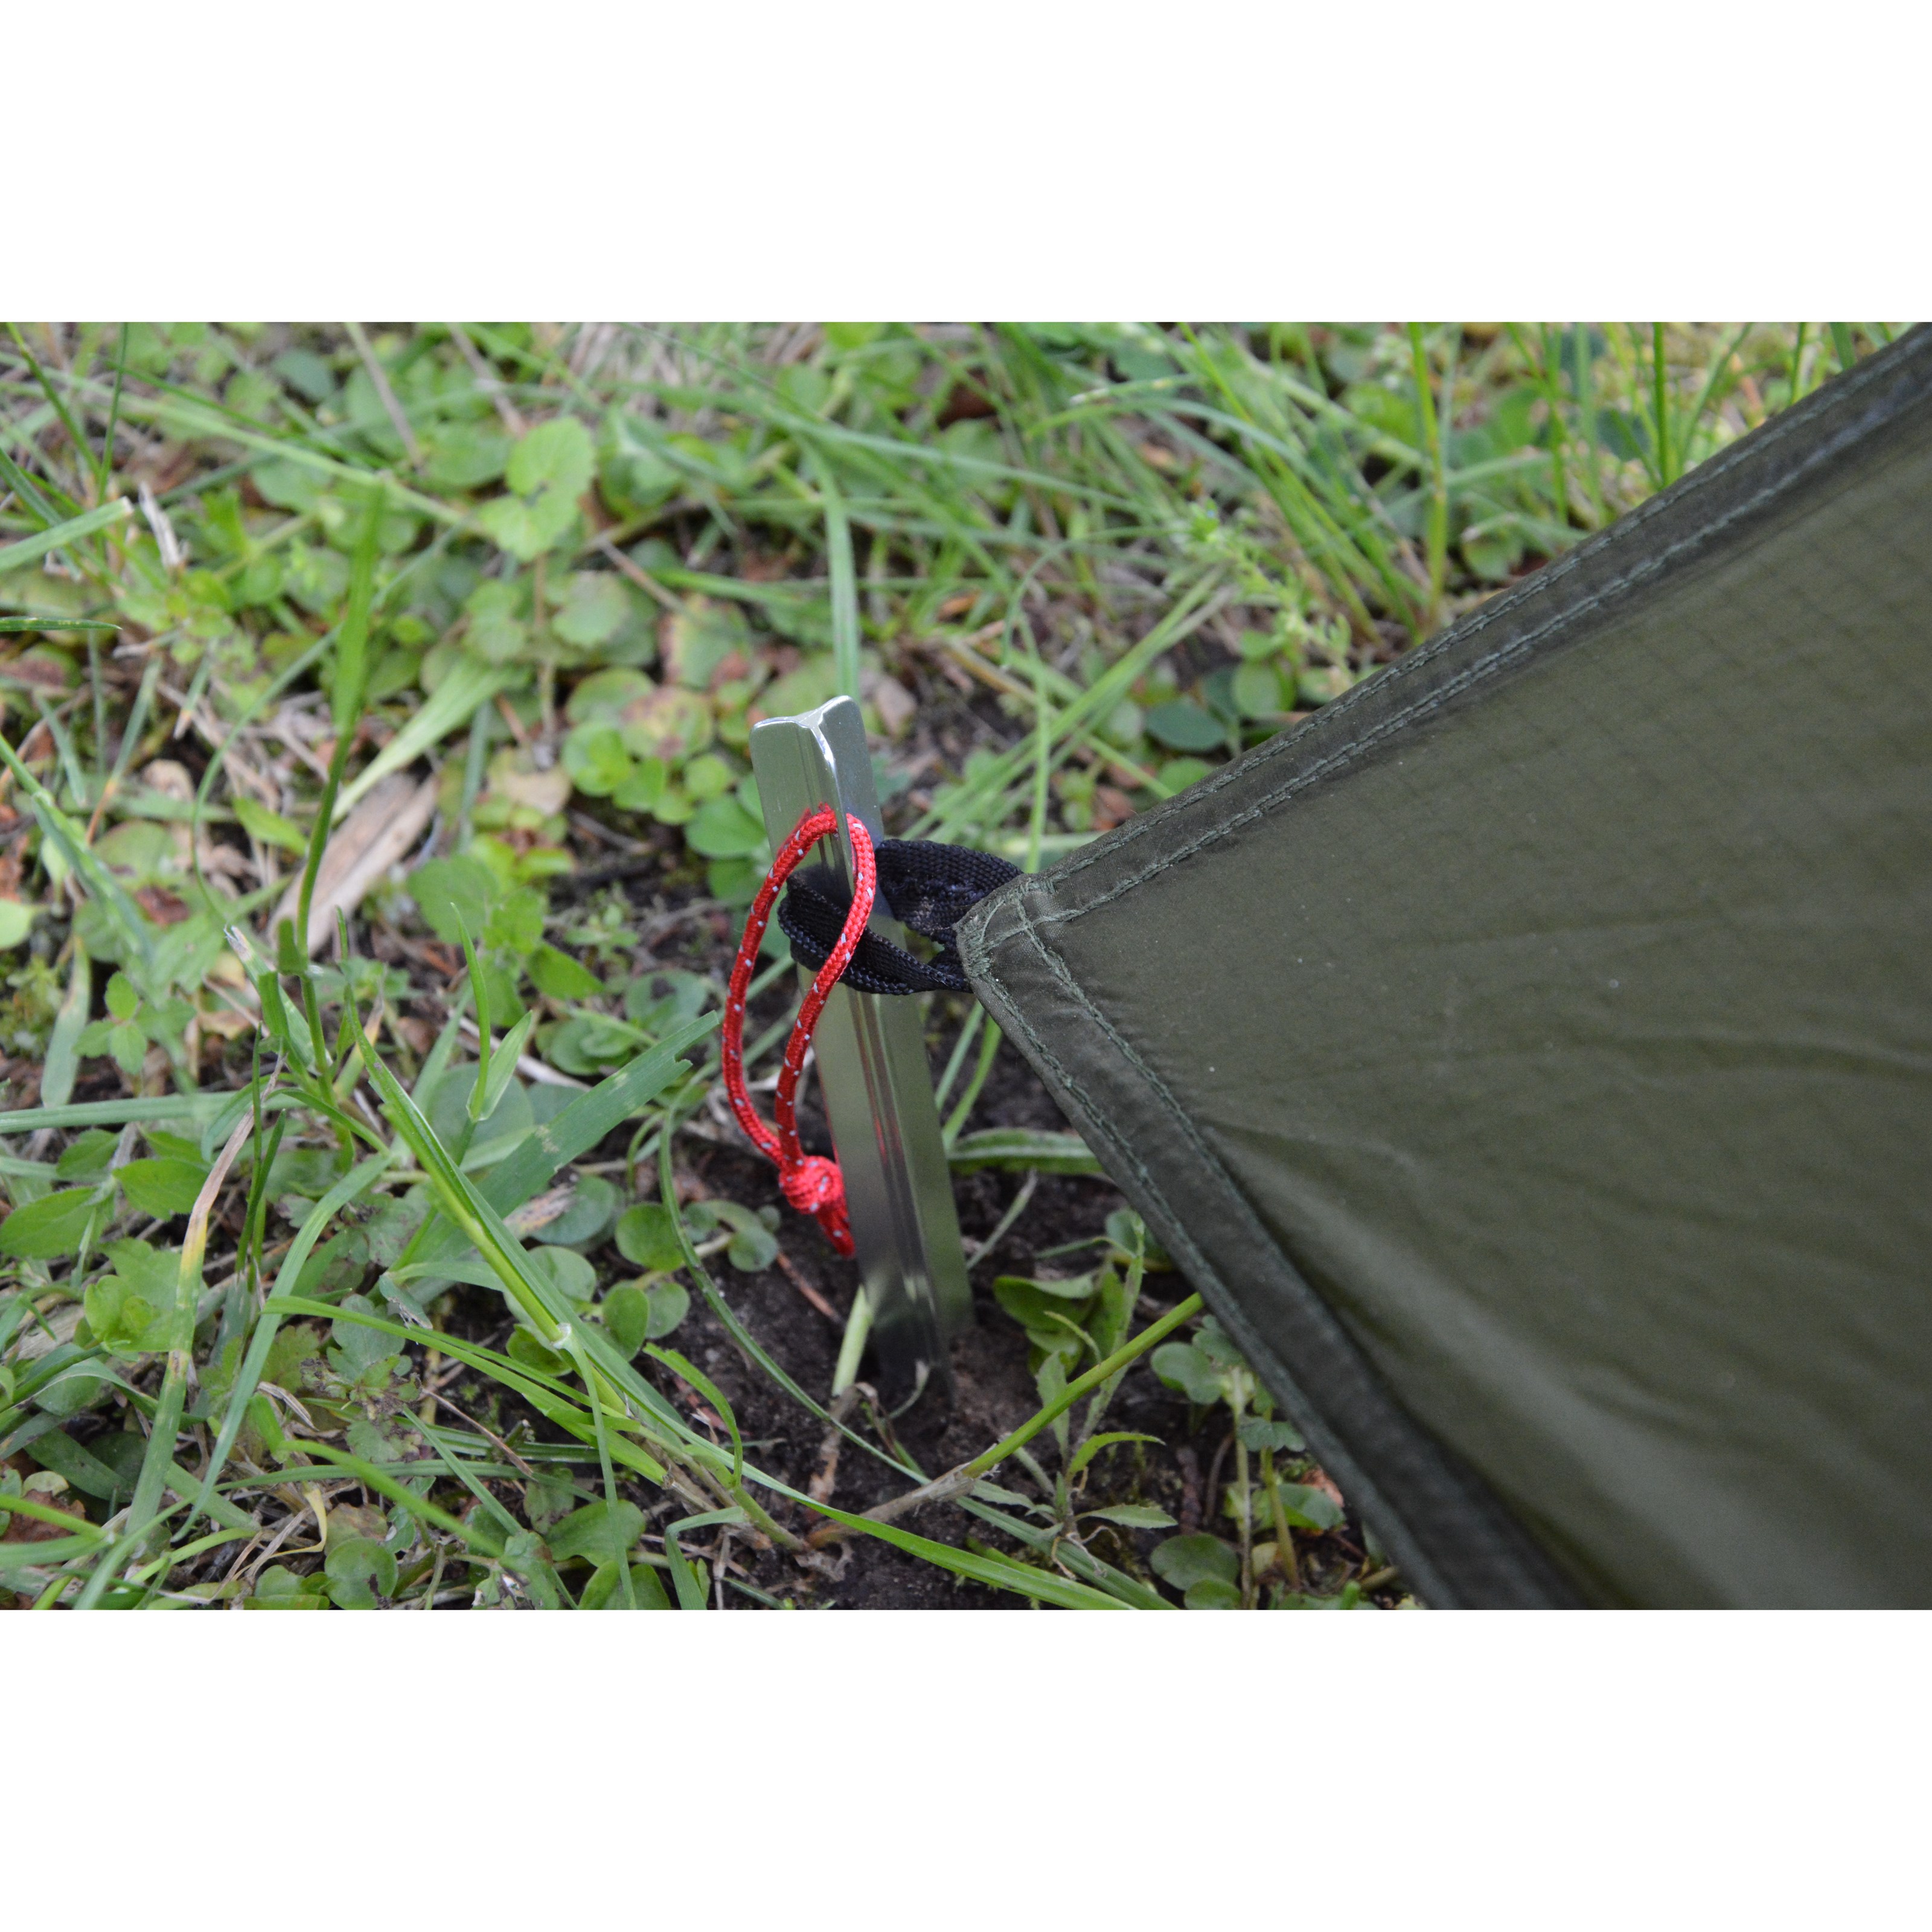 PLACHTA SHELTER olive green  614111 L-11